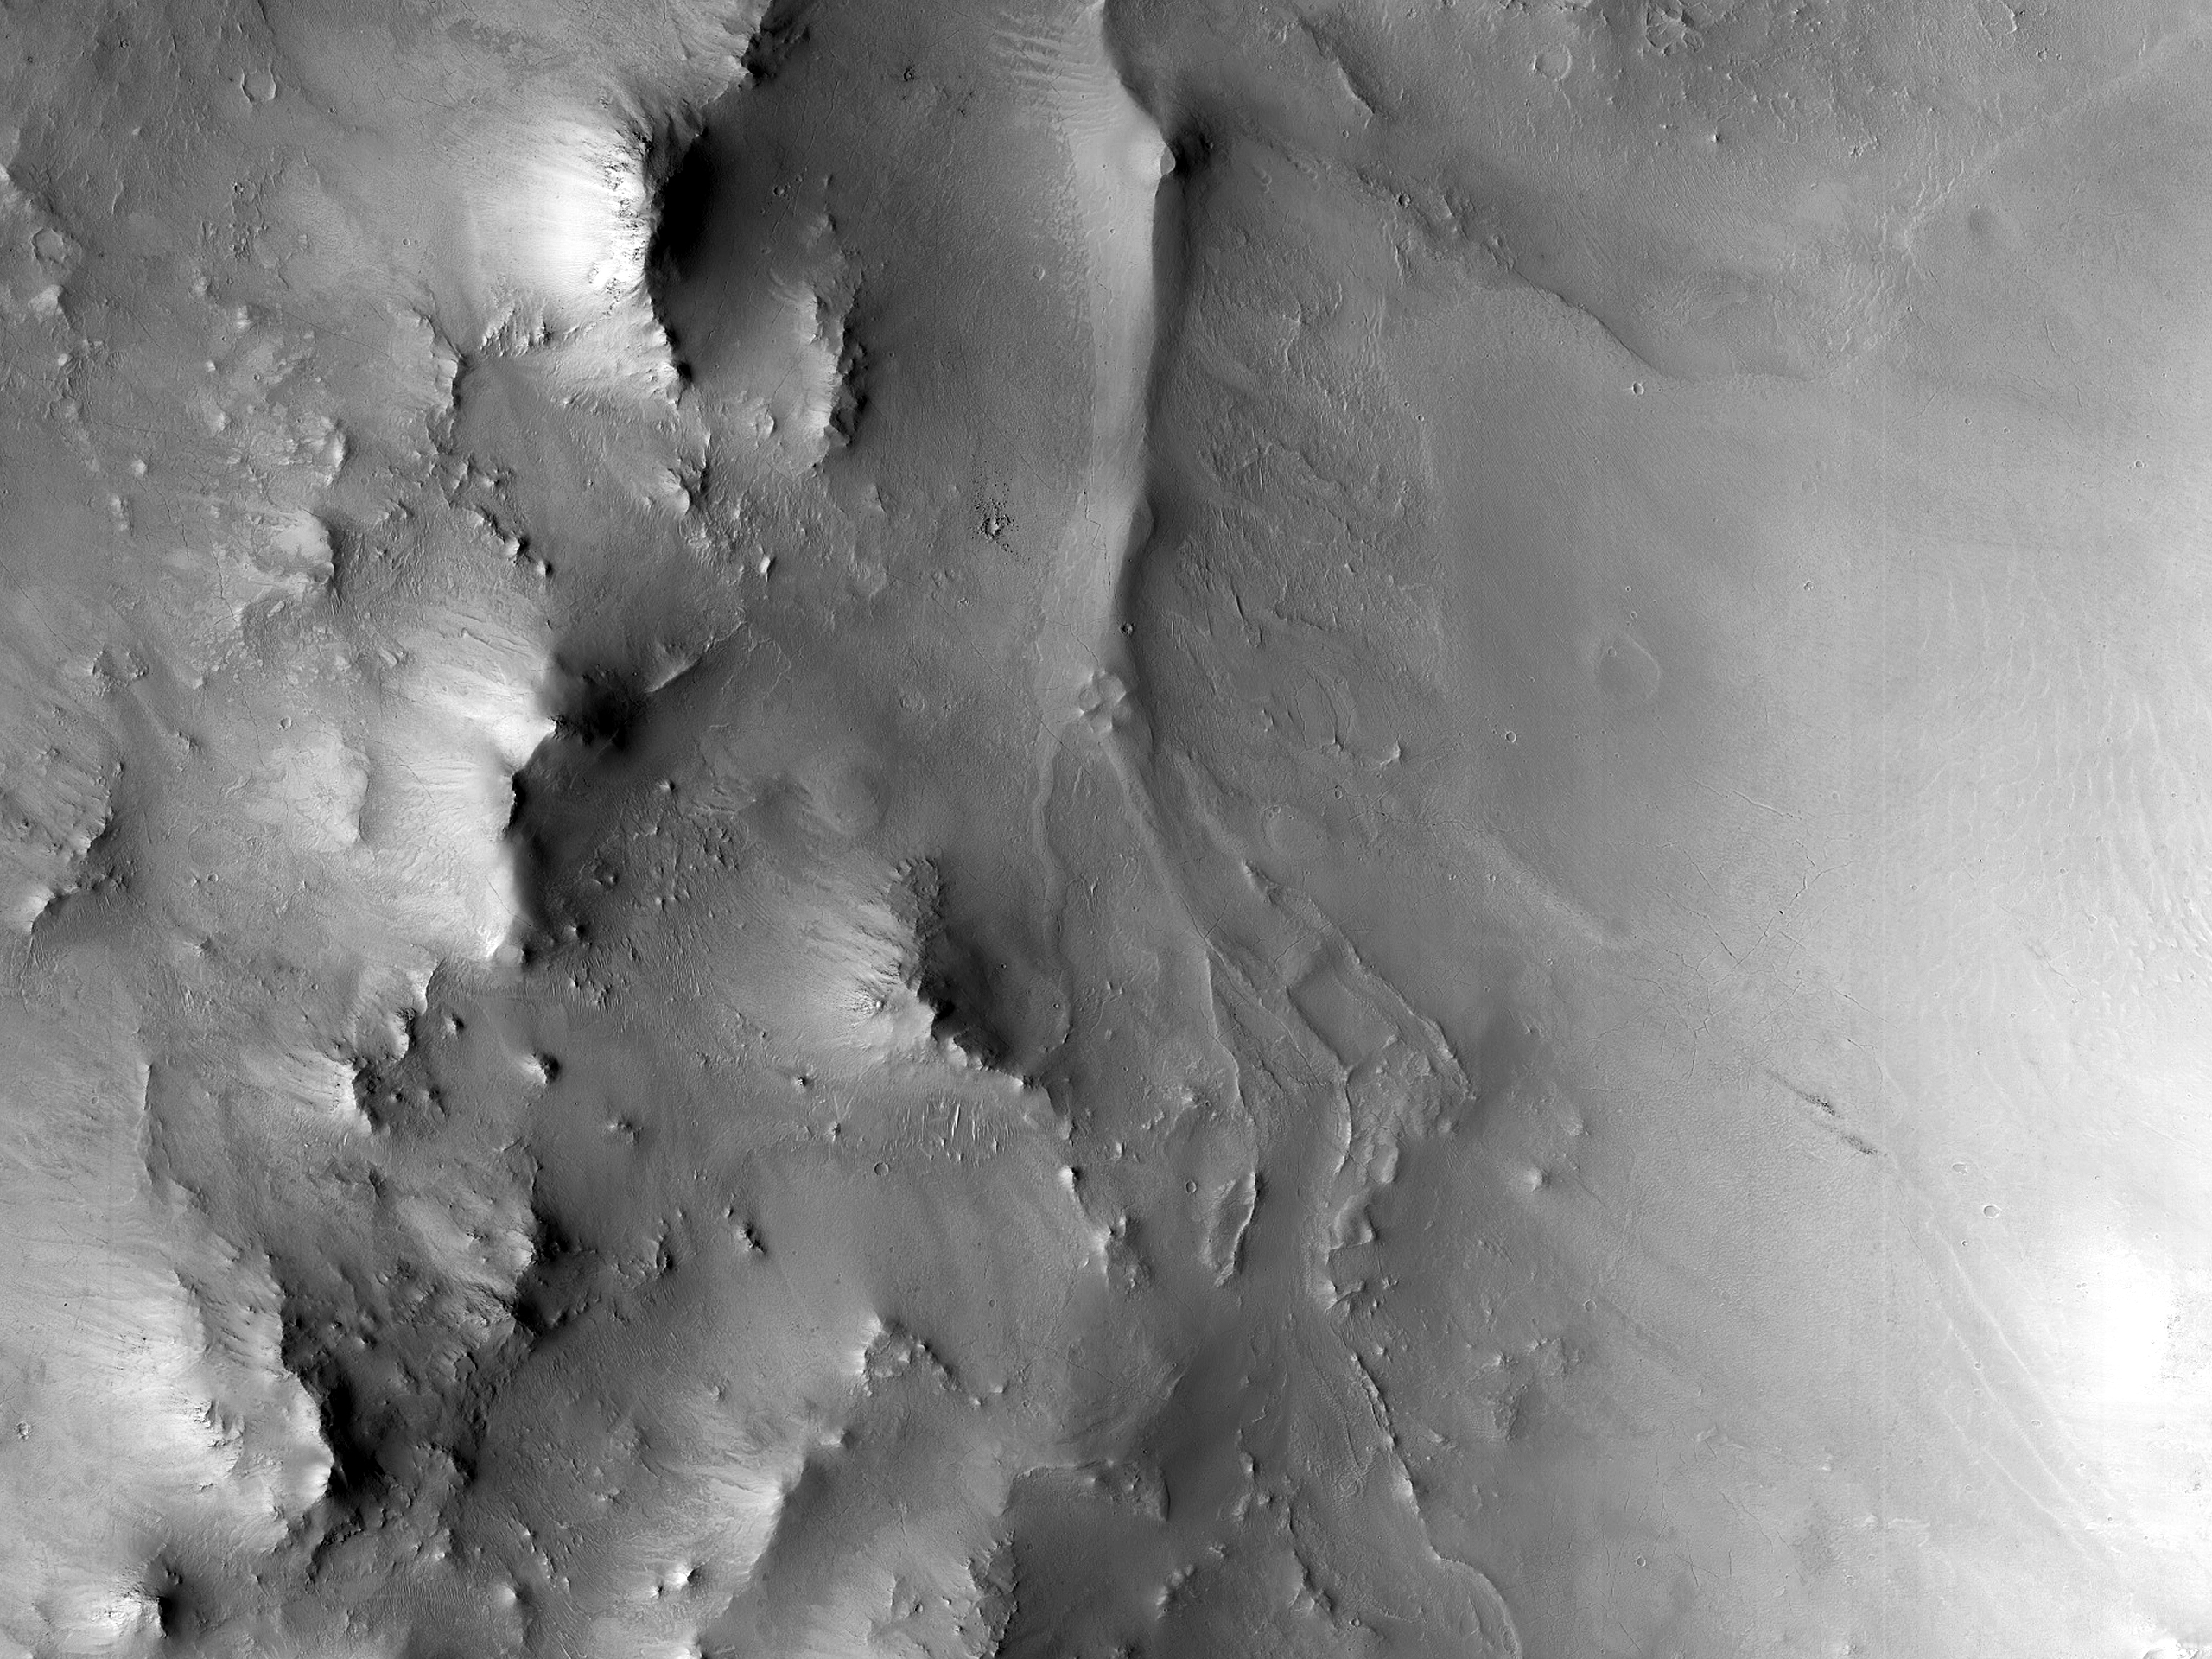 Branched Ridges on a Crater Wall